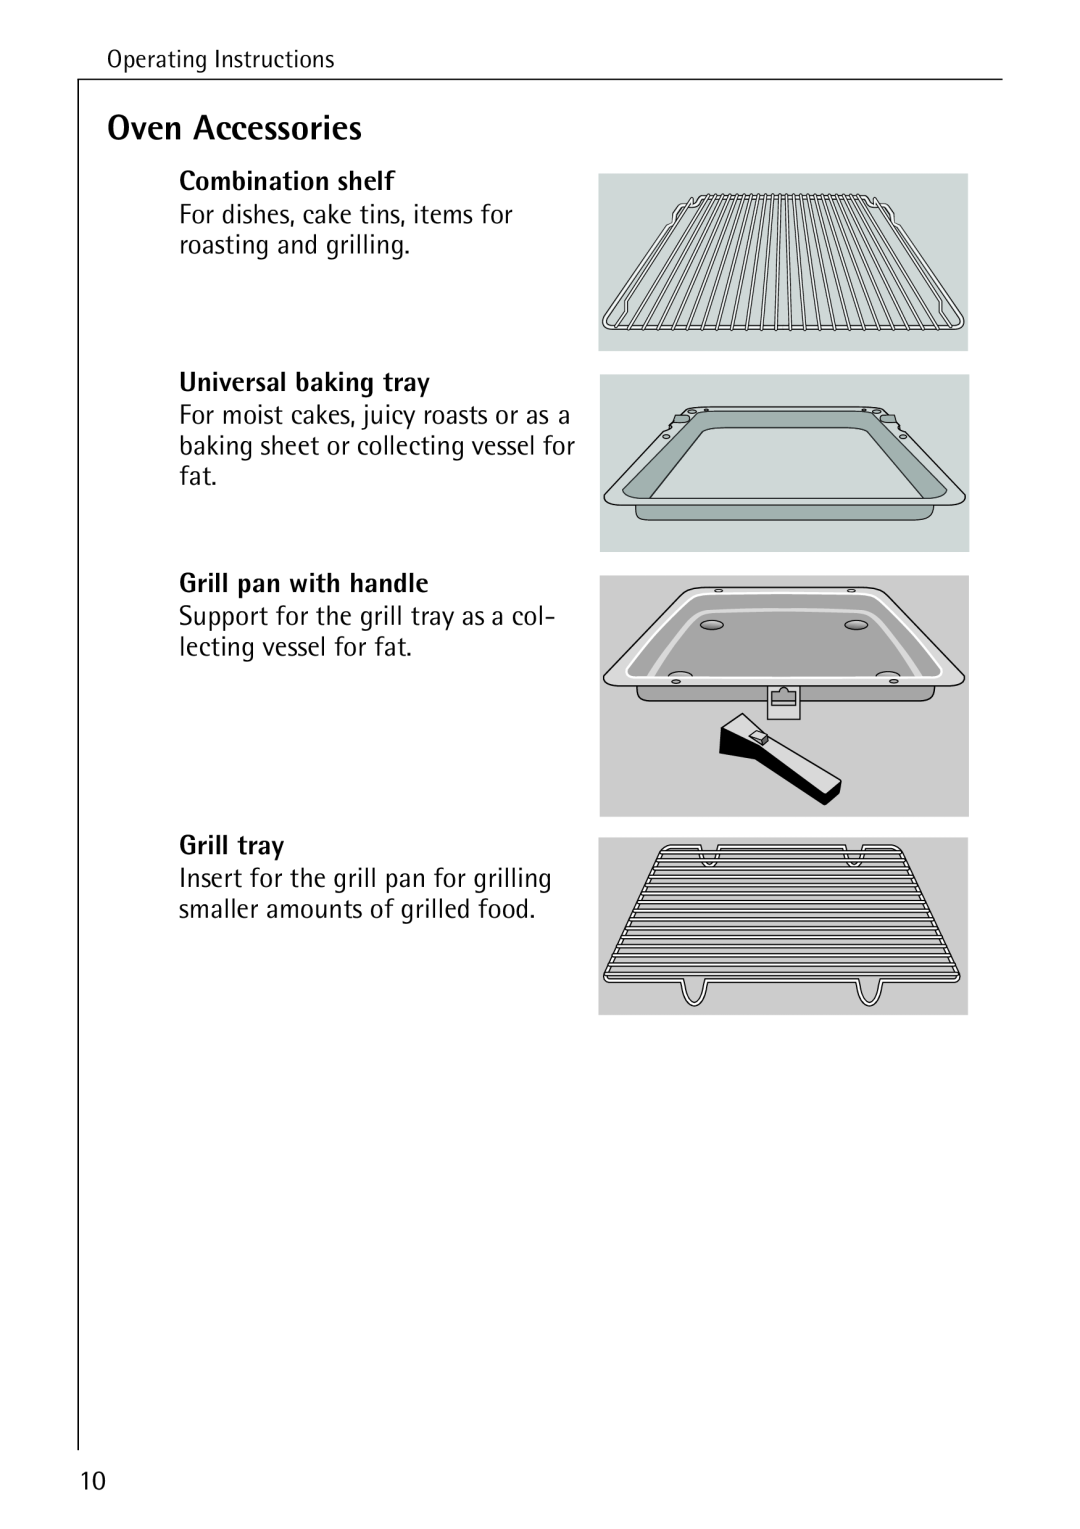 Electrolux B4140-1 manual Oven Accessories, Combination shelf, Universal baking tray, Grill pan with handle, Grill tray 